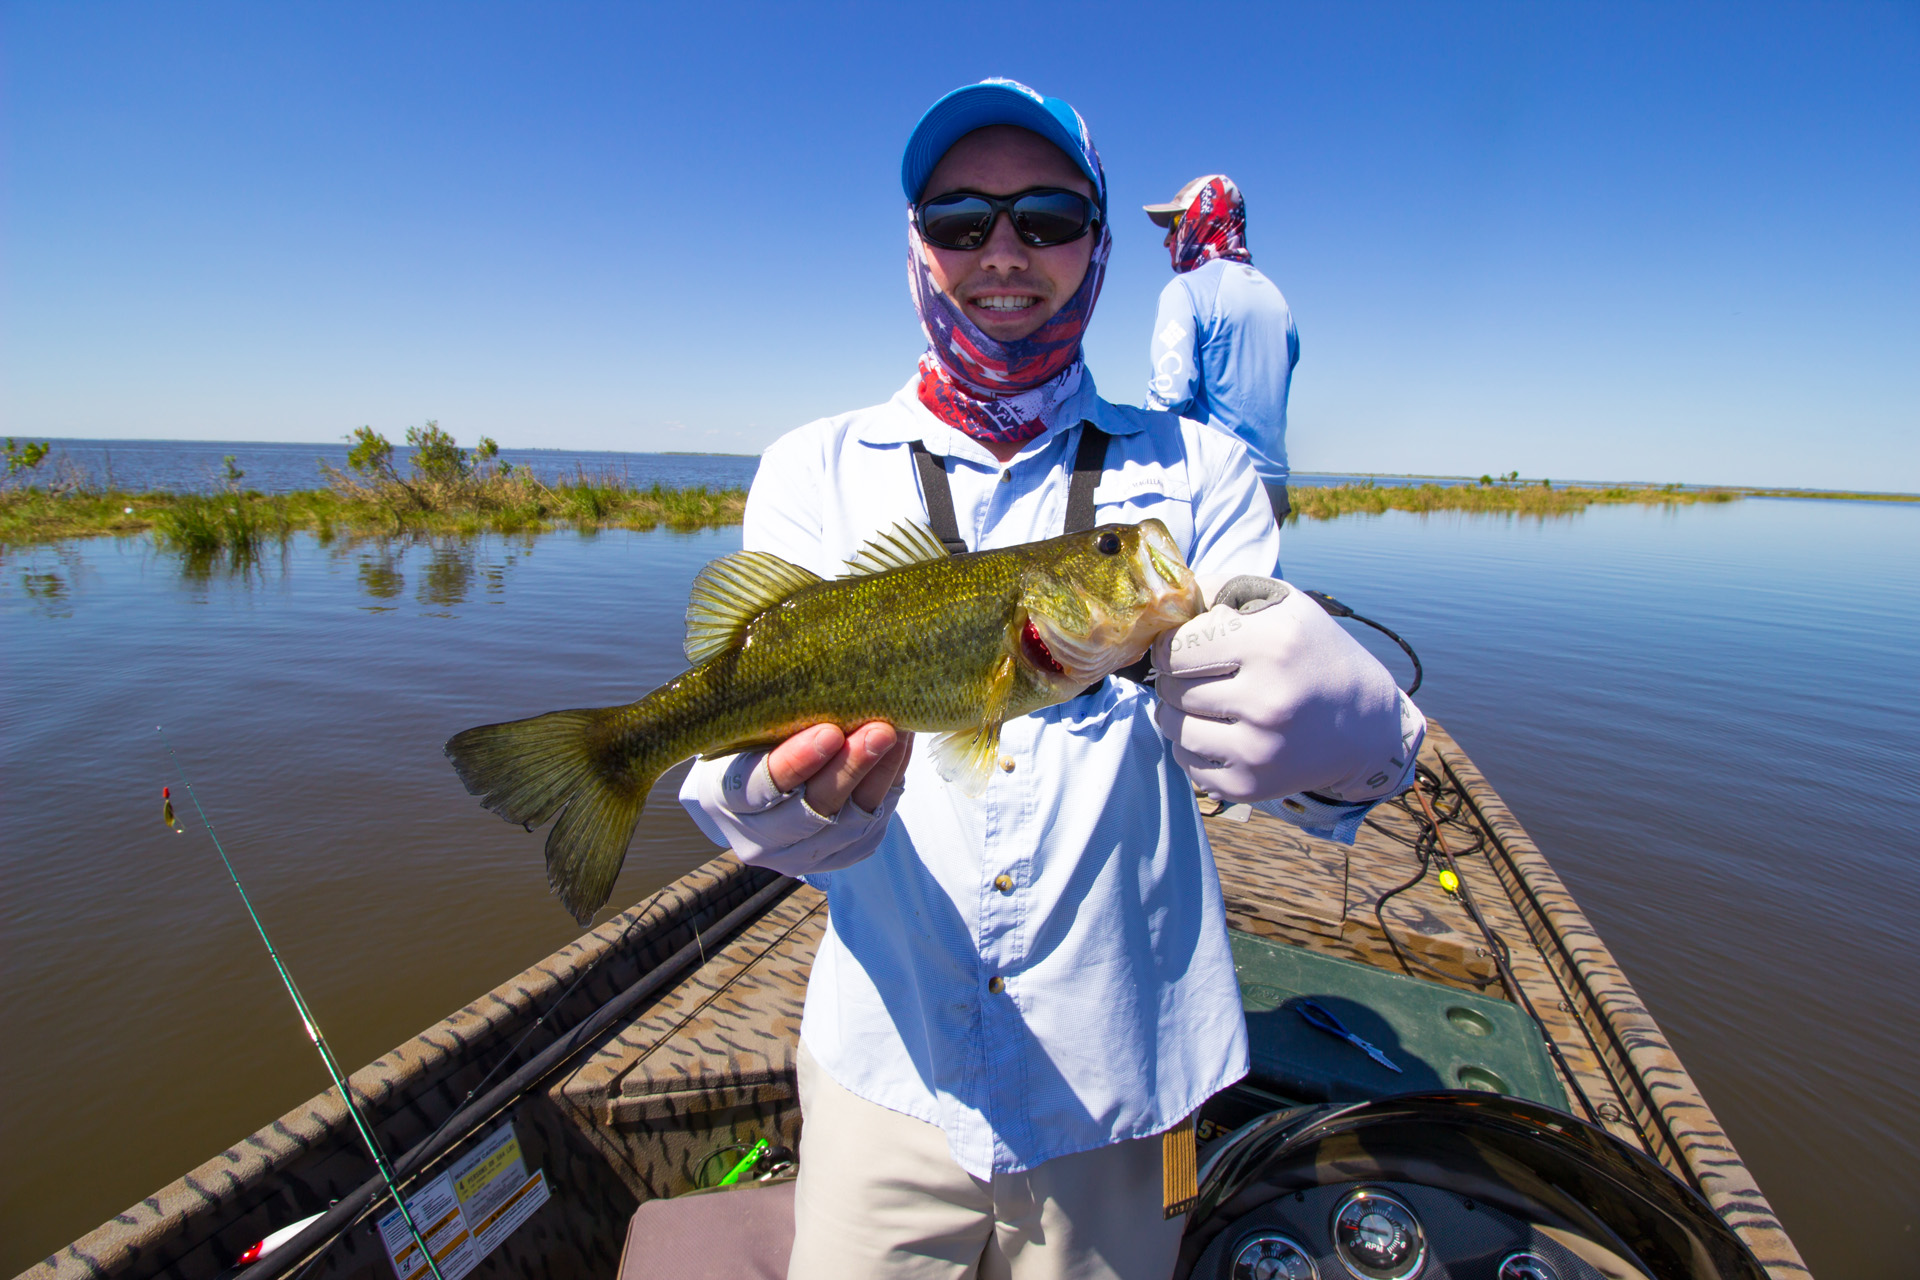 Do you wear a buff when fishing? and let's see it if so. - Page